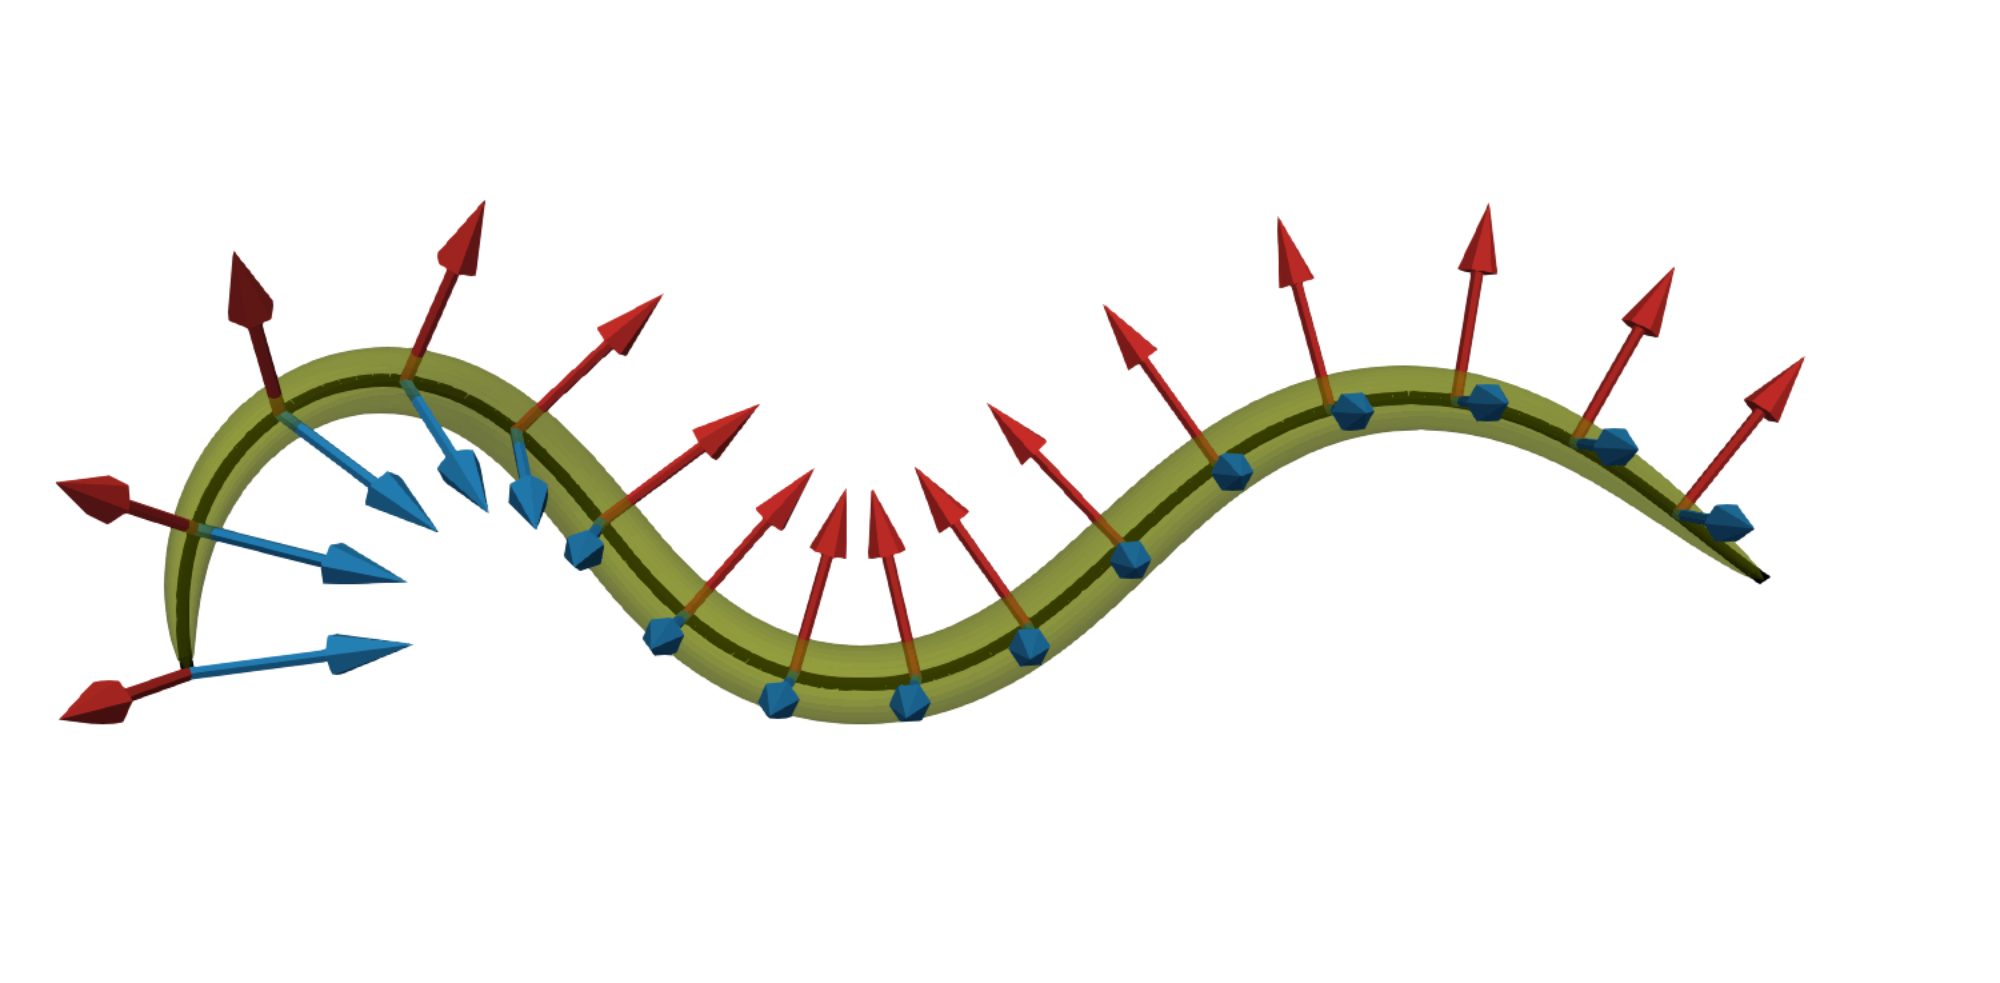 A new mathematical model of the worm in 3D which can bend and twist. Image from [Ranner (2020)](/publication/ranner-2020)